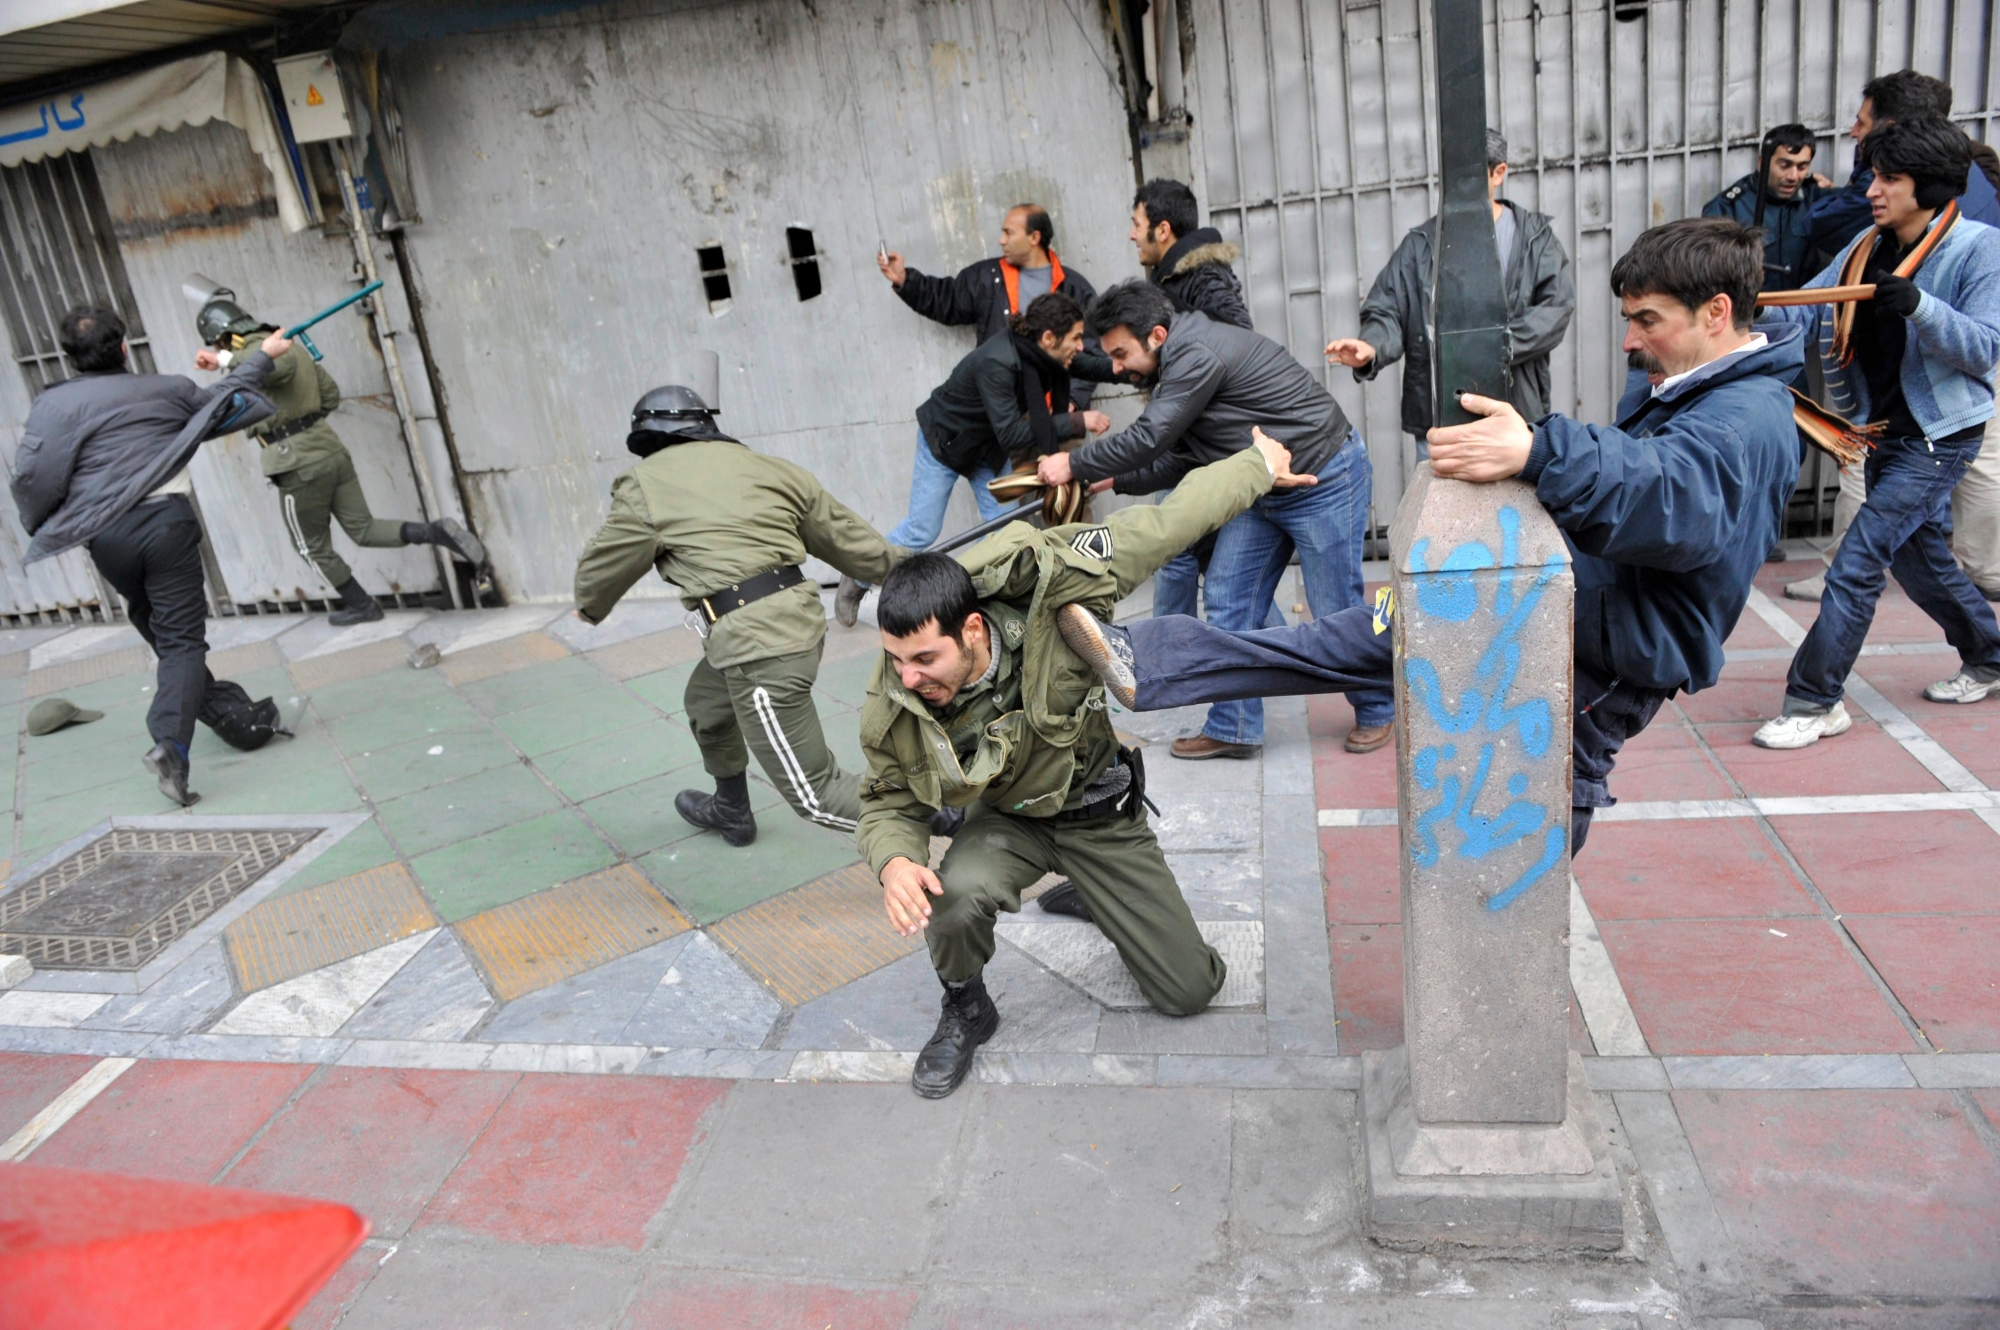 JAHRESRUECKBLICK 2009 - DEZEMBER - This photo, taken by an individual not employed by the Associated Press and obtained by the AP outside Iran shows Iranian protestors beating police officers, during anti-government protest in Tehran, Iran, Sunday, Dec. 27, 2009. (KEYSTONE/AP Photo)  EDITORS NOTE AS A RESULT OF AN OFFICIAL IRANIAN GOVERNMENT BAN ON FOREIGN MEDIA COVERING SOME EVENTS IN IRAN, THE AP WAS PREVENTED FROM INDEPENDENT ACCESS TO THIS EVENT JAHRESRUECKBLICK 2009 - IRAN REGIERUNG PROTEST